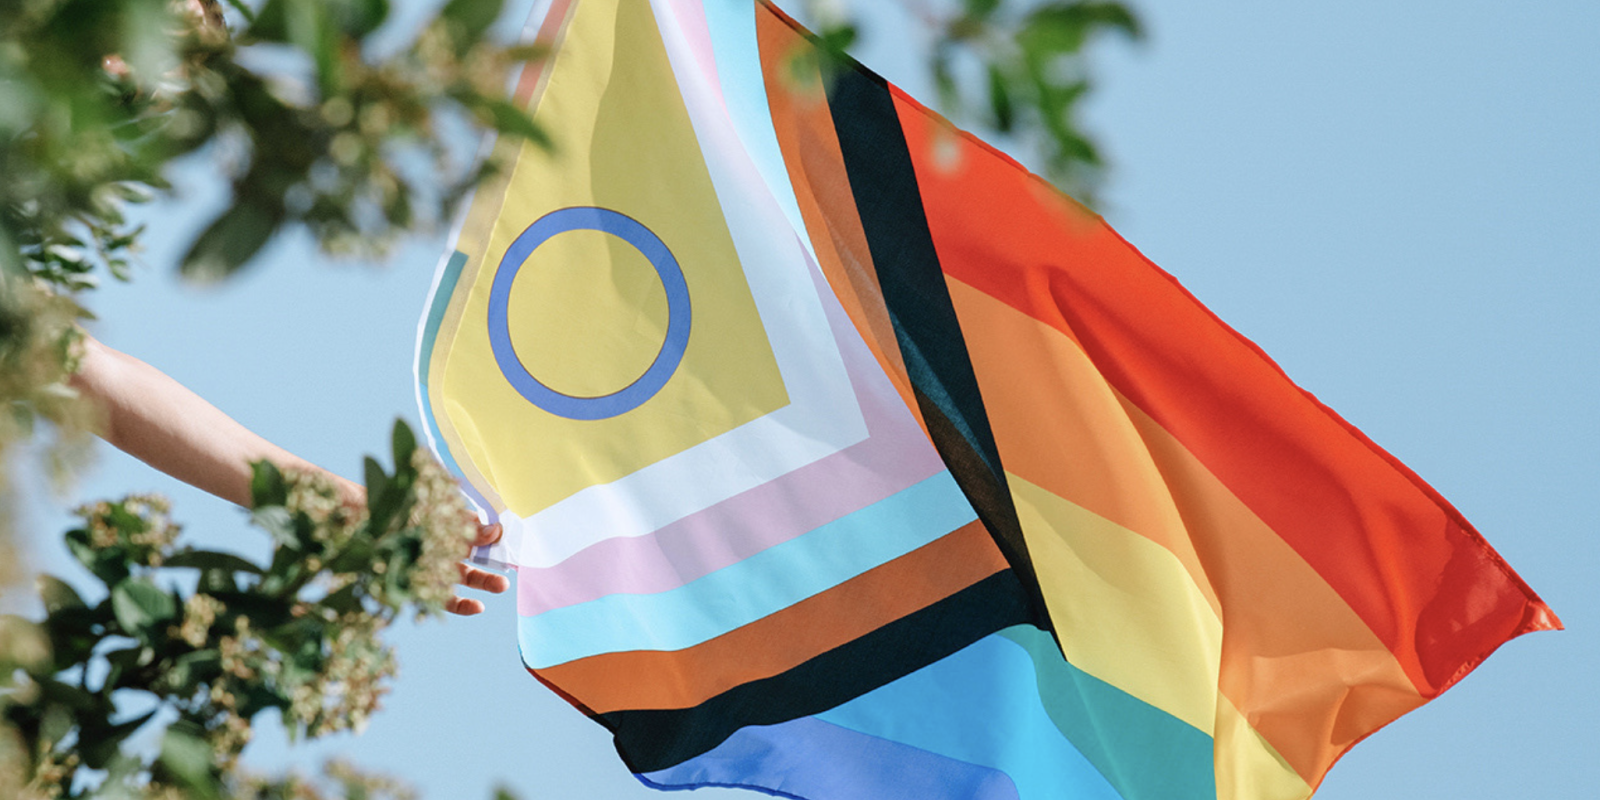 The progressive Pride flag blows in the wind behind a tree branch.